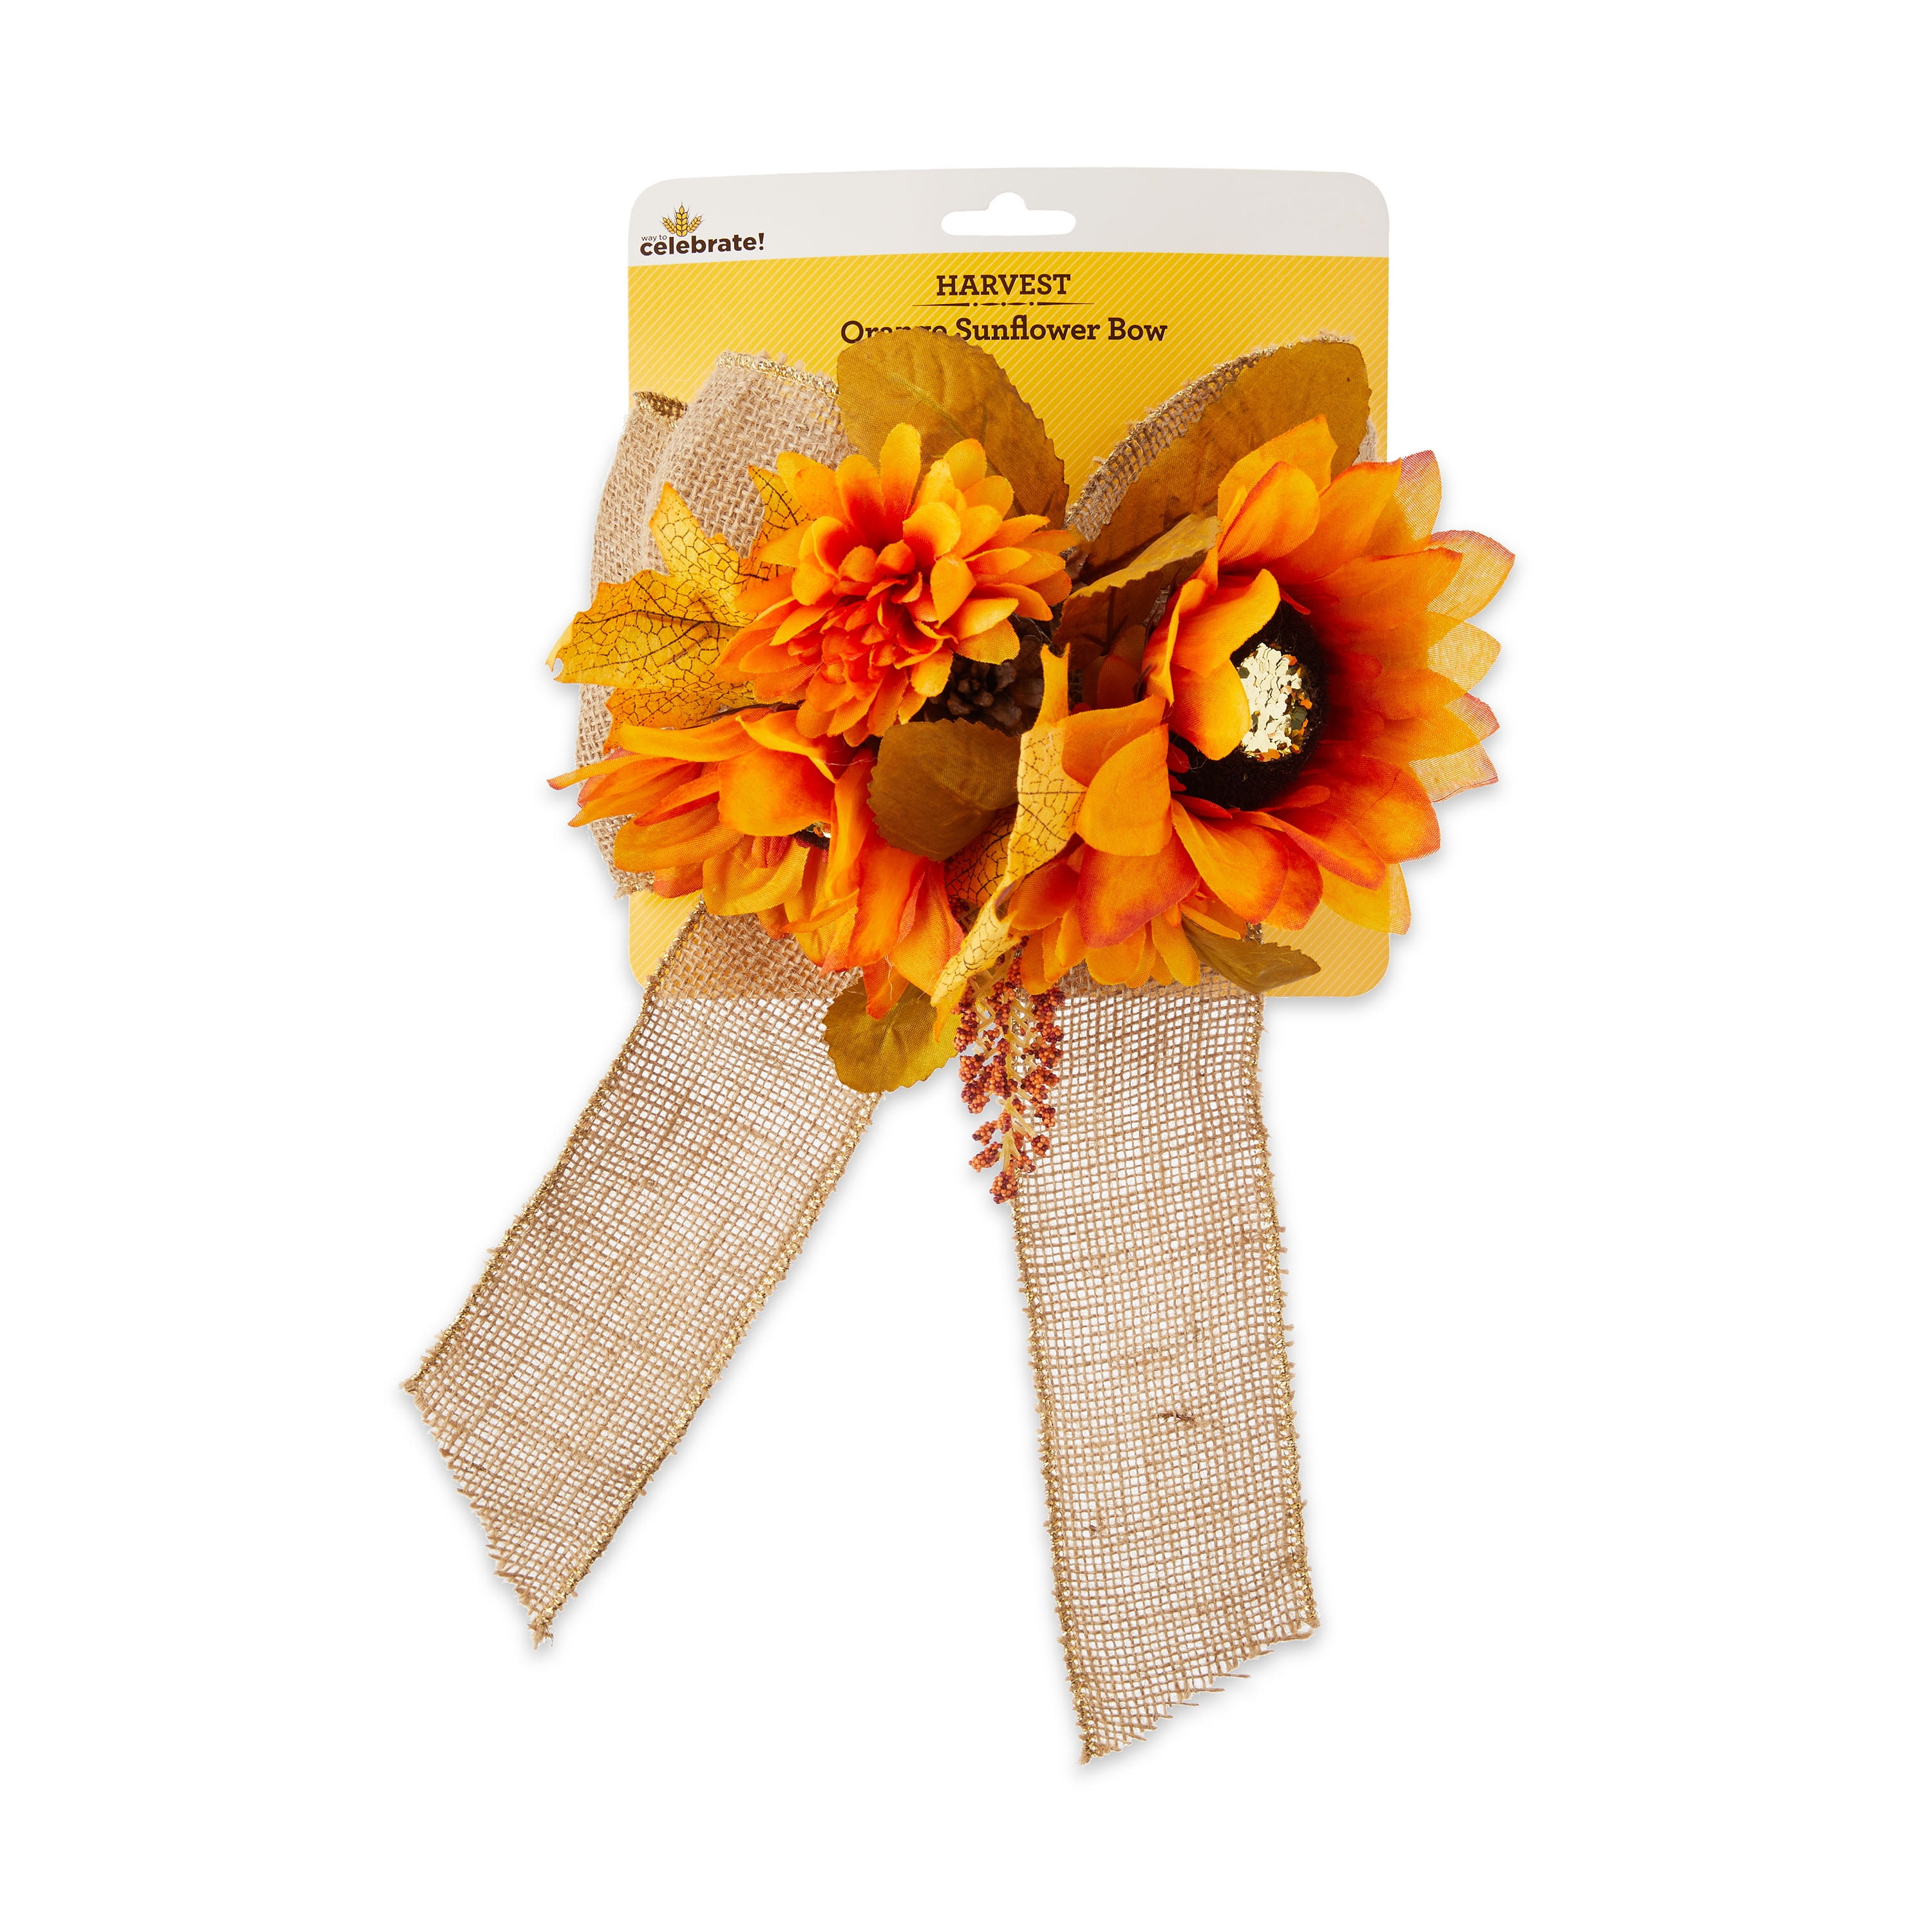 Way to Celebrate Floral Bow, Orange Artificial Sunflower with Glitter Center Harvest Decoration